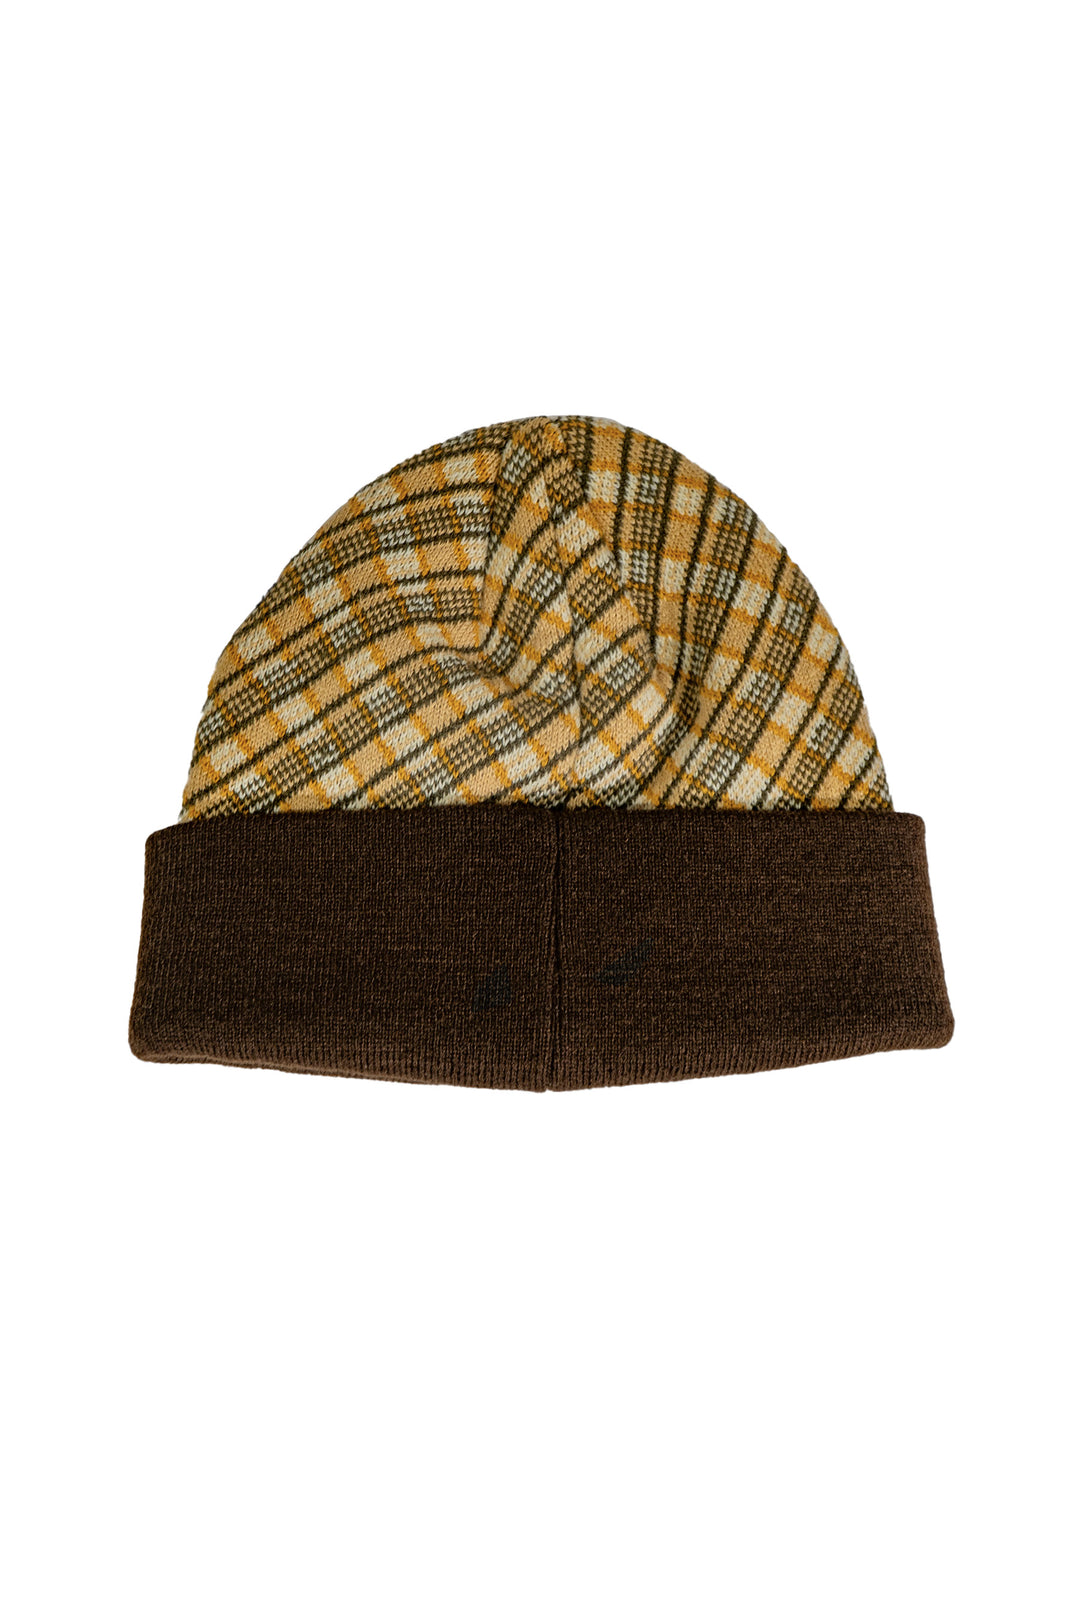 Consistent Progress Plaid Embroidered Patch Beanie